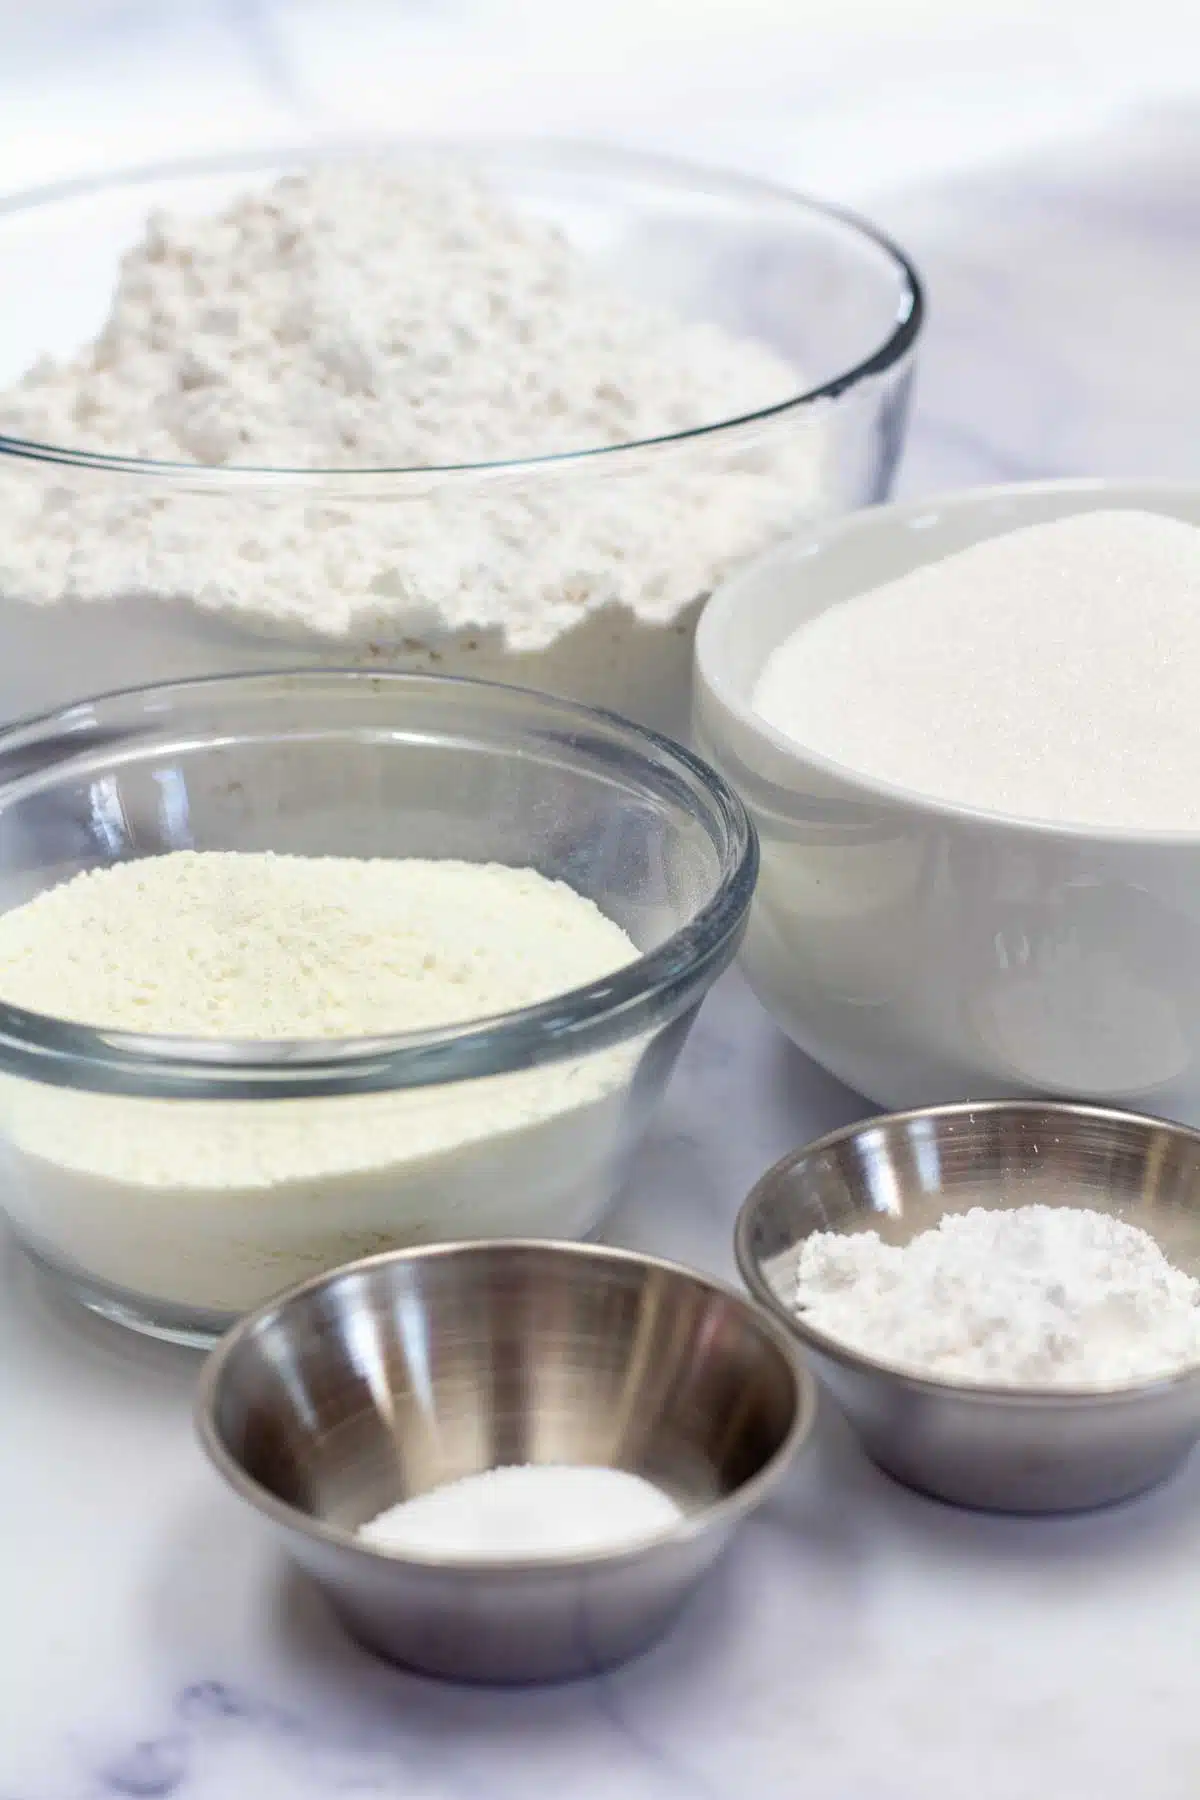 Tall image showing the dry ingredients needed for white cake mix.